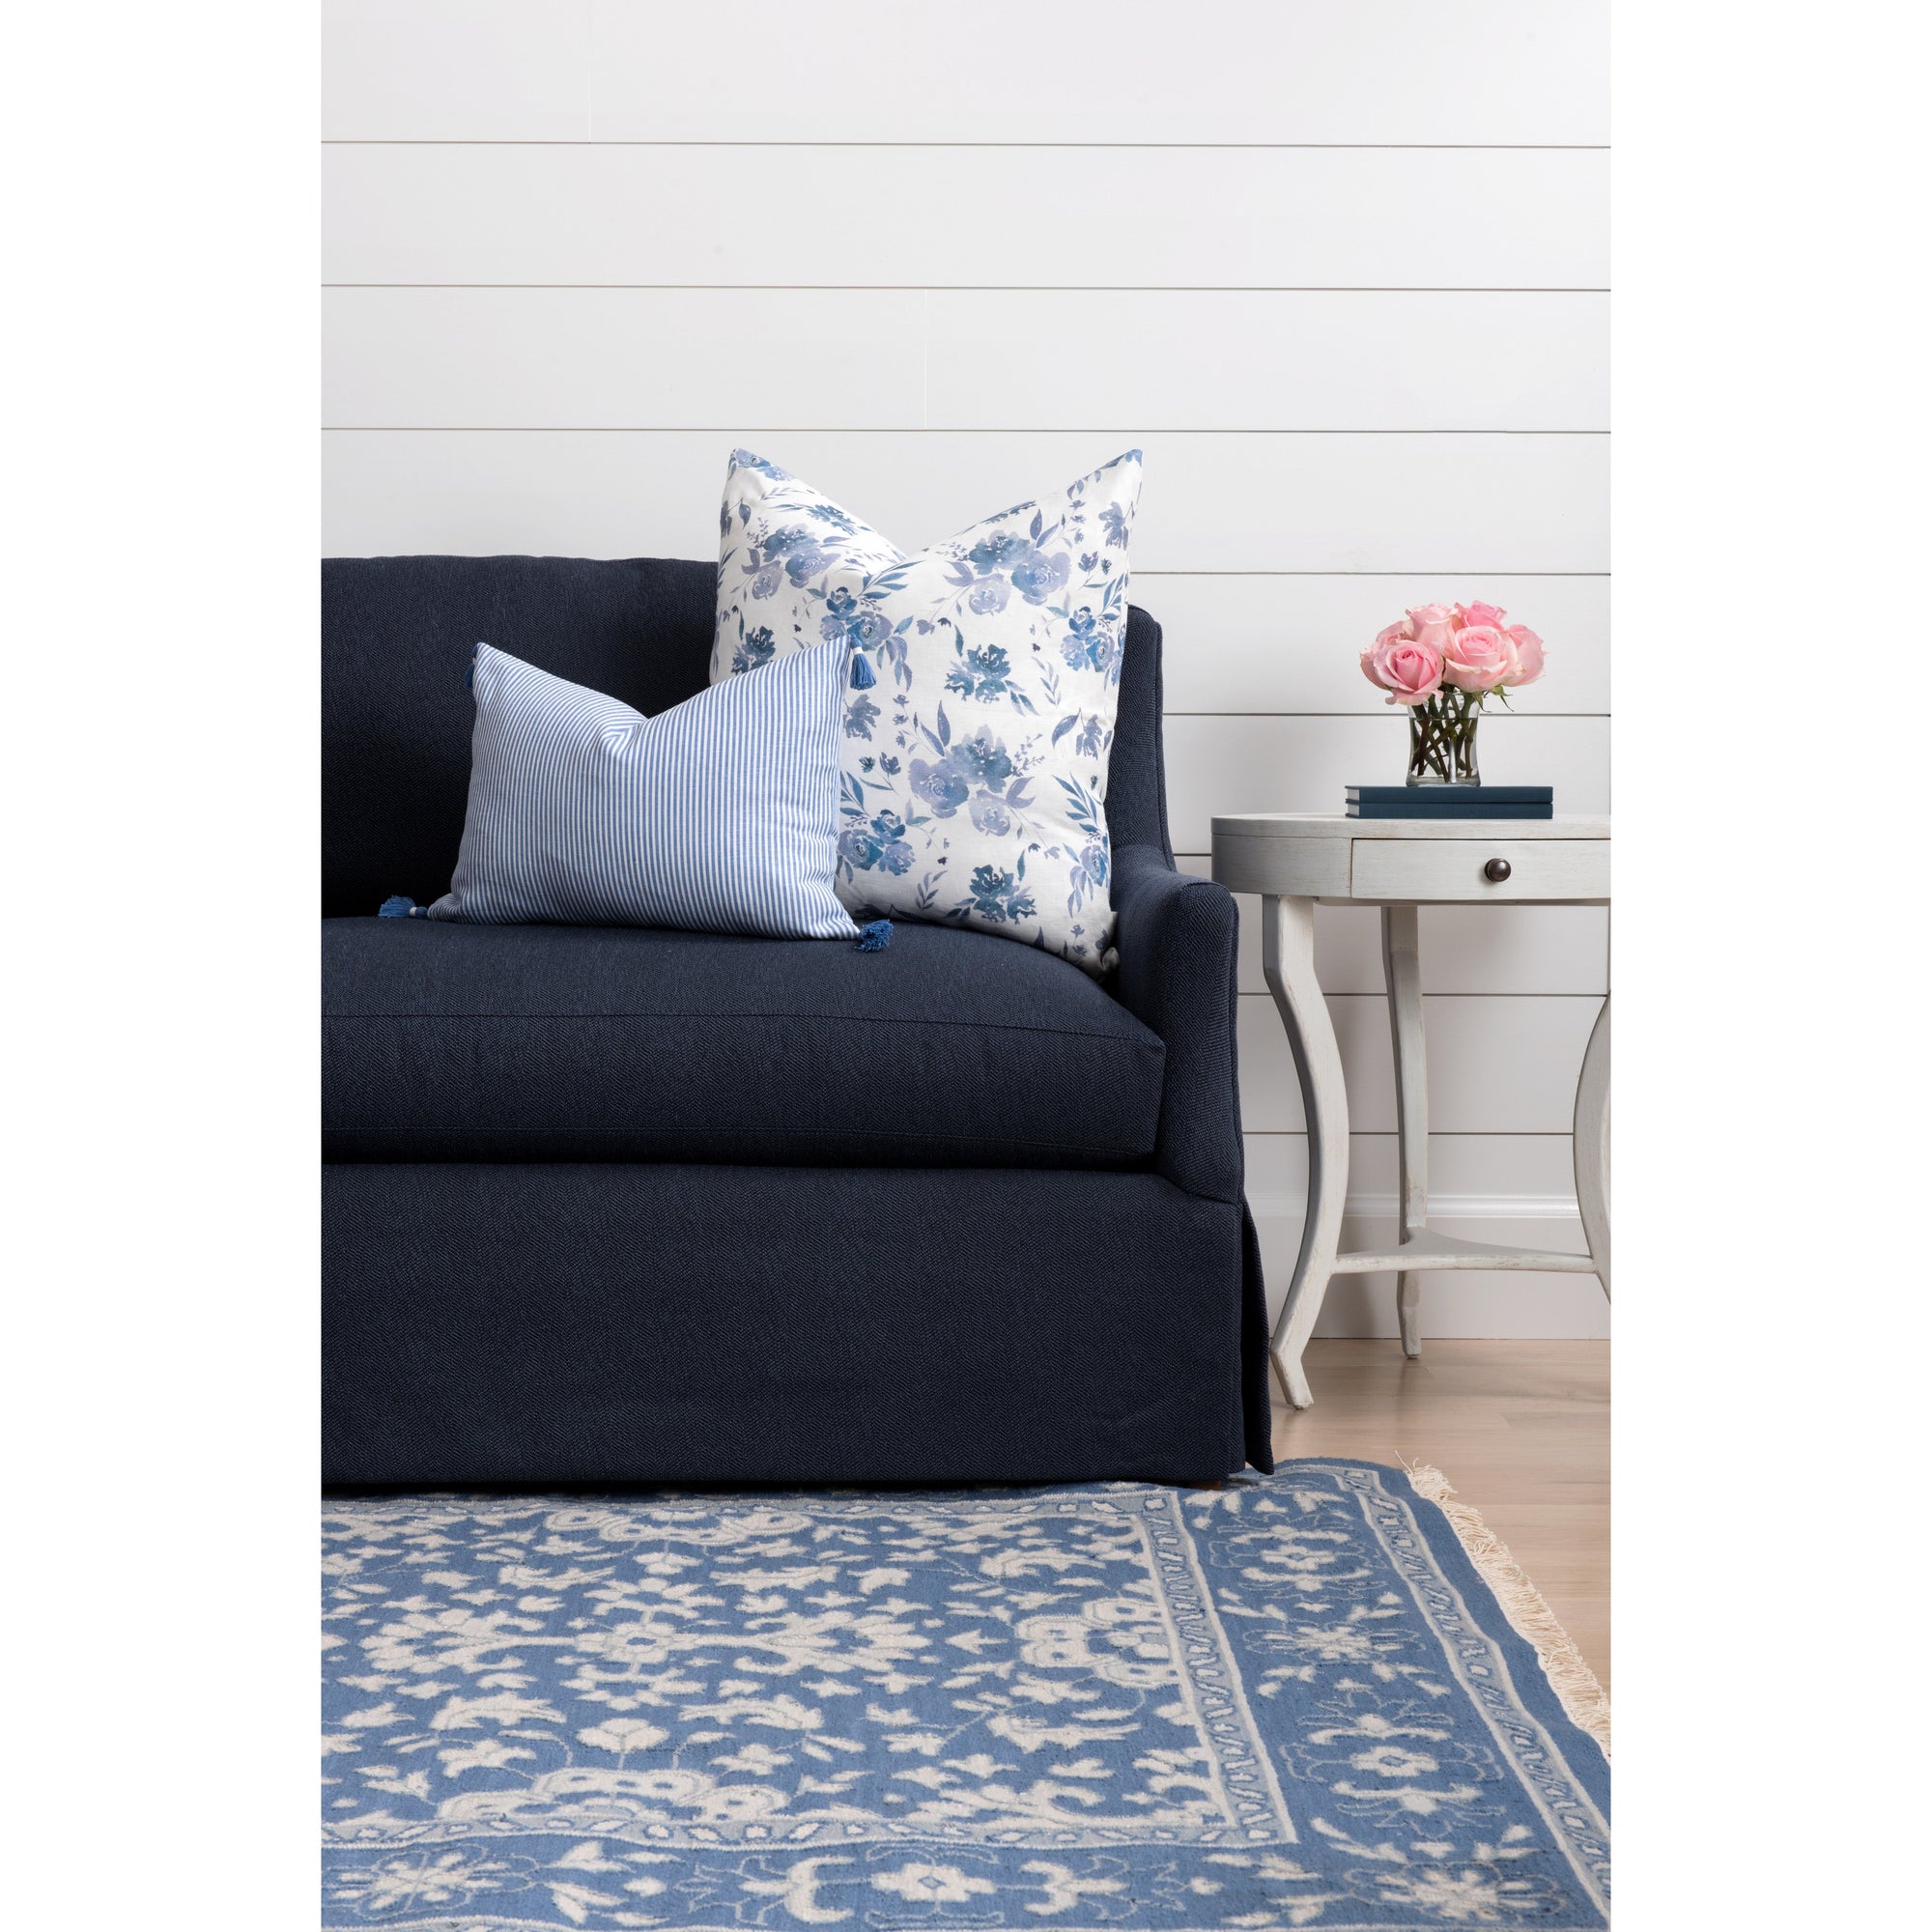 French Blue Flat Weave Emma Rug in Living Room